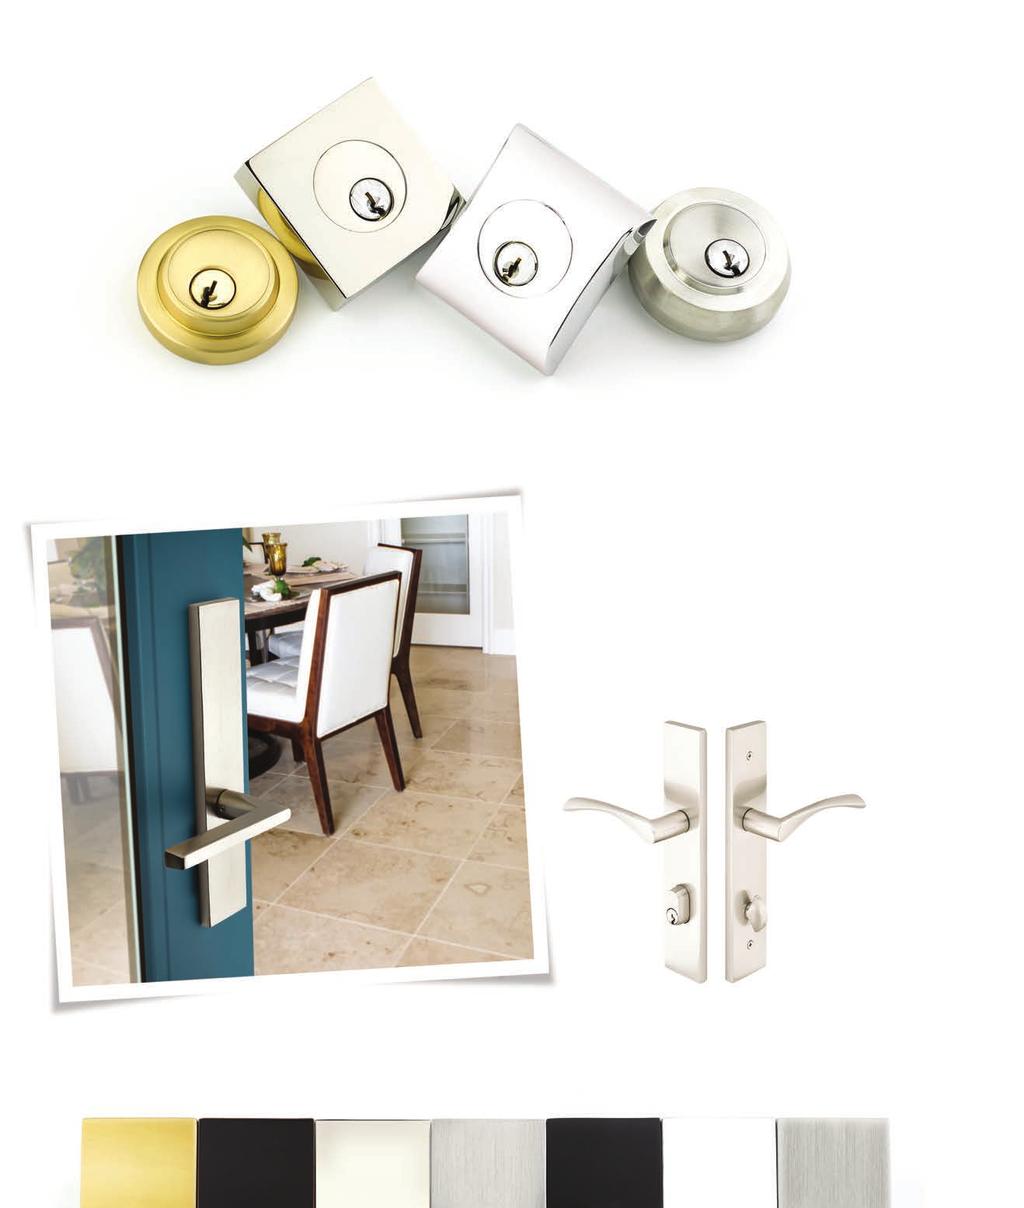 CONTEMPORARY / MODERN BRASS & STAINLESS STEEL Deadbolts Modern Deadbolt Satin Brass Square Deadbolt Polished Nickel - Lifetime Neos Deadbolt Polished Chrome Round Deadbolt Stainless Steel Multi Point